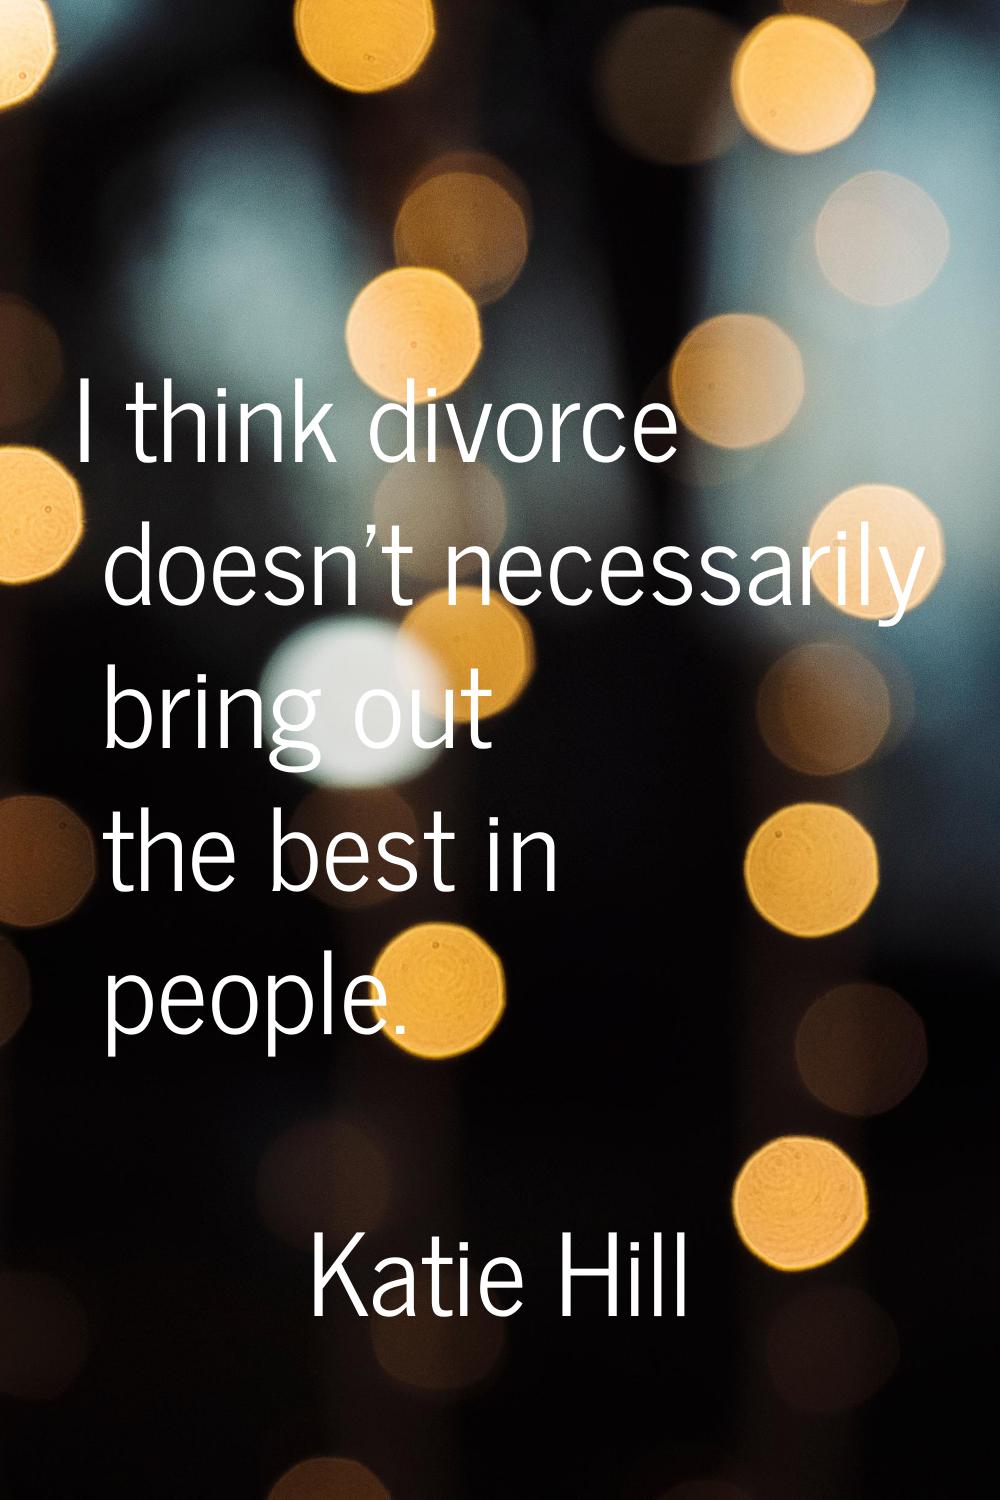 I think divorce doesn't necessarily bring out the best in people.